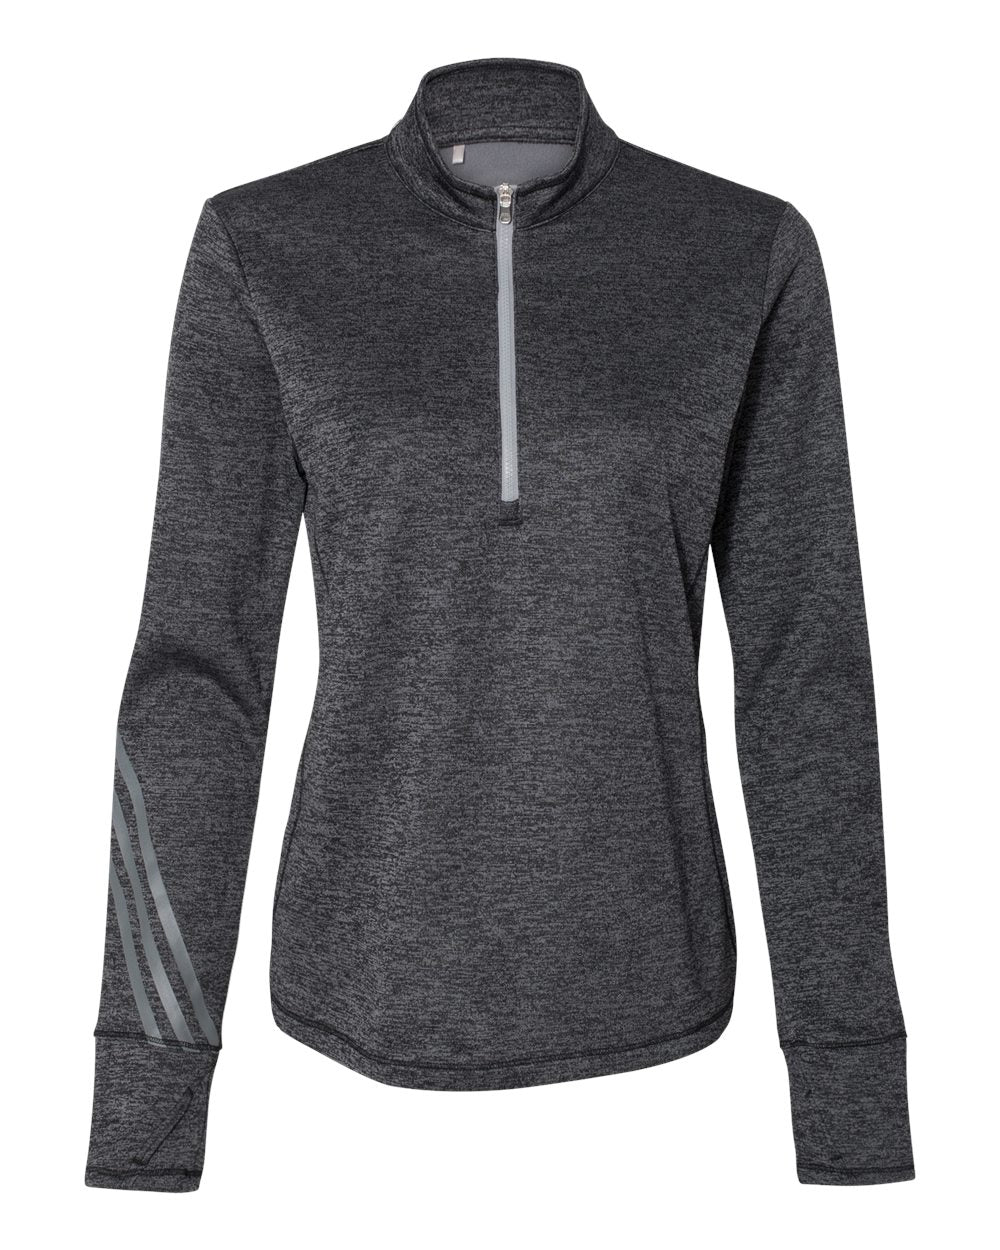 Brushed Terry Heathered Quarter-Zip Ladies Pullover - Adidas A285